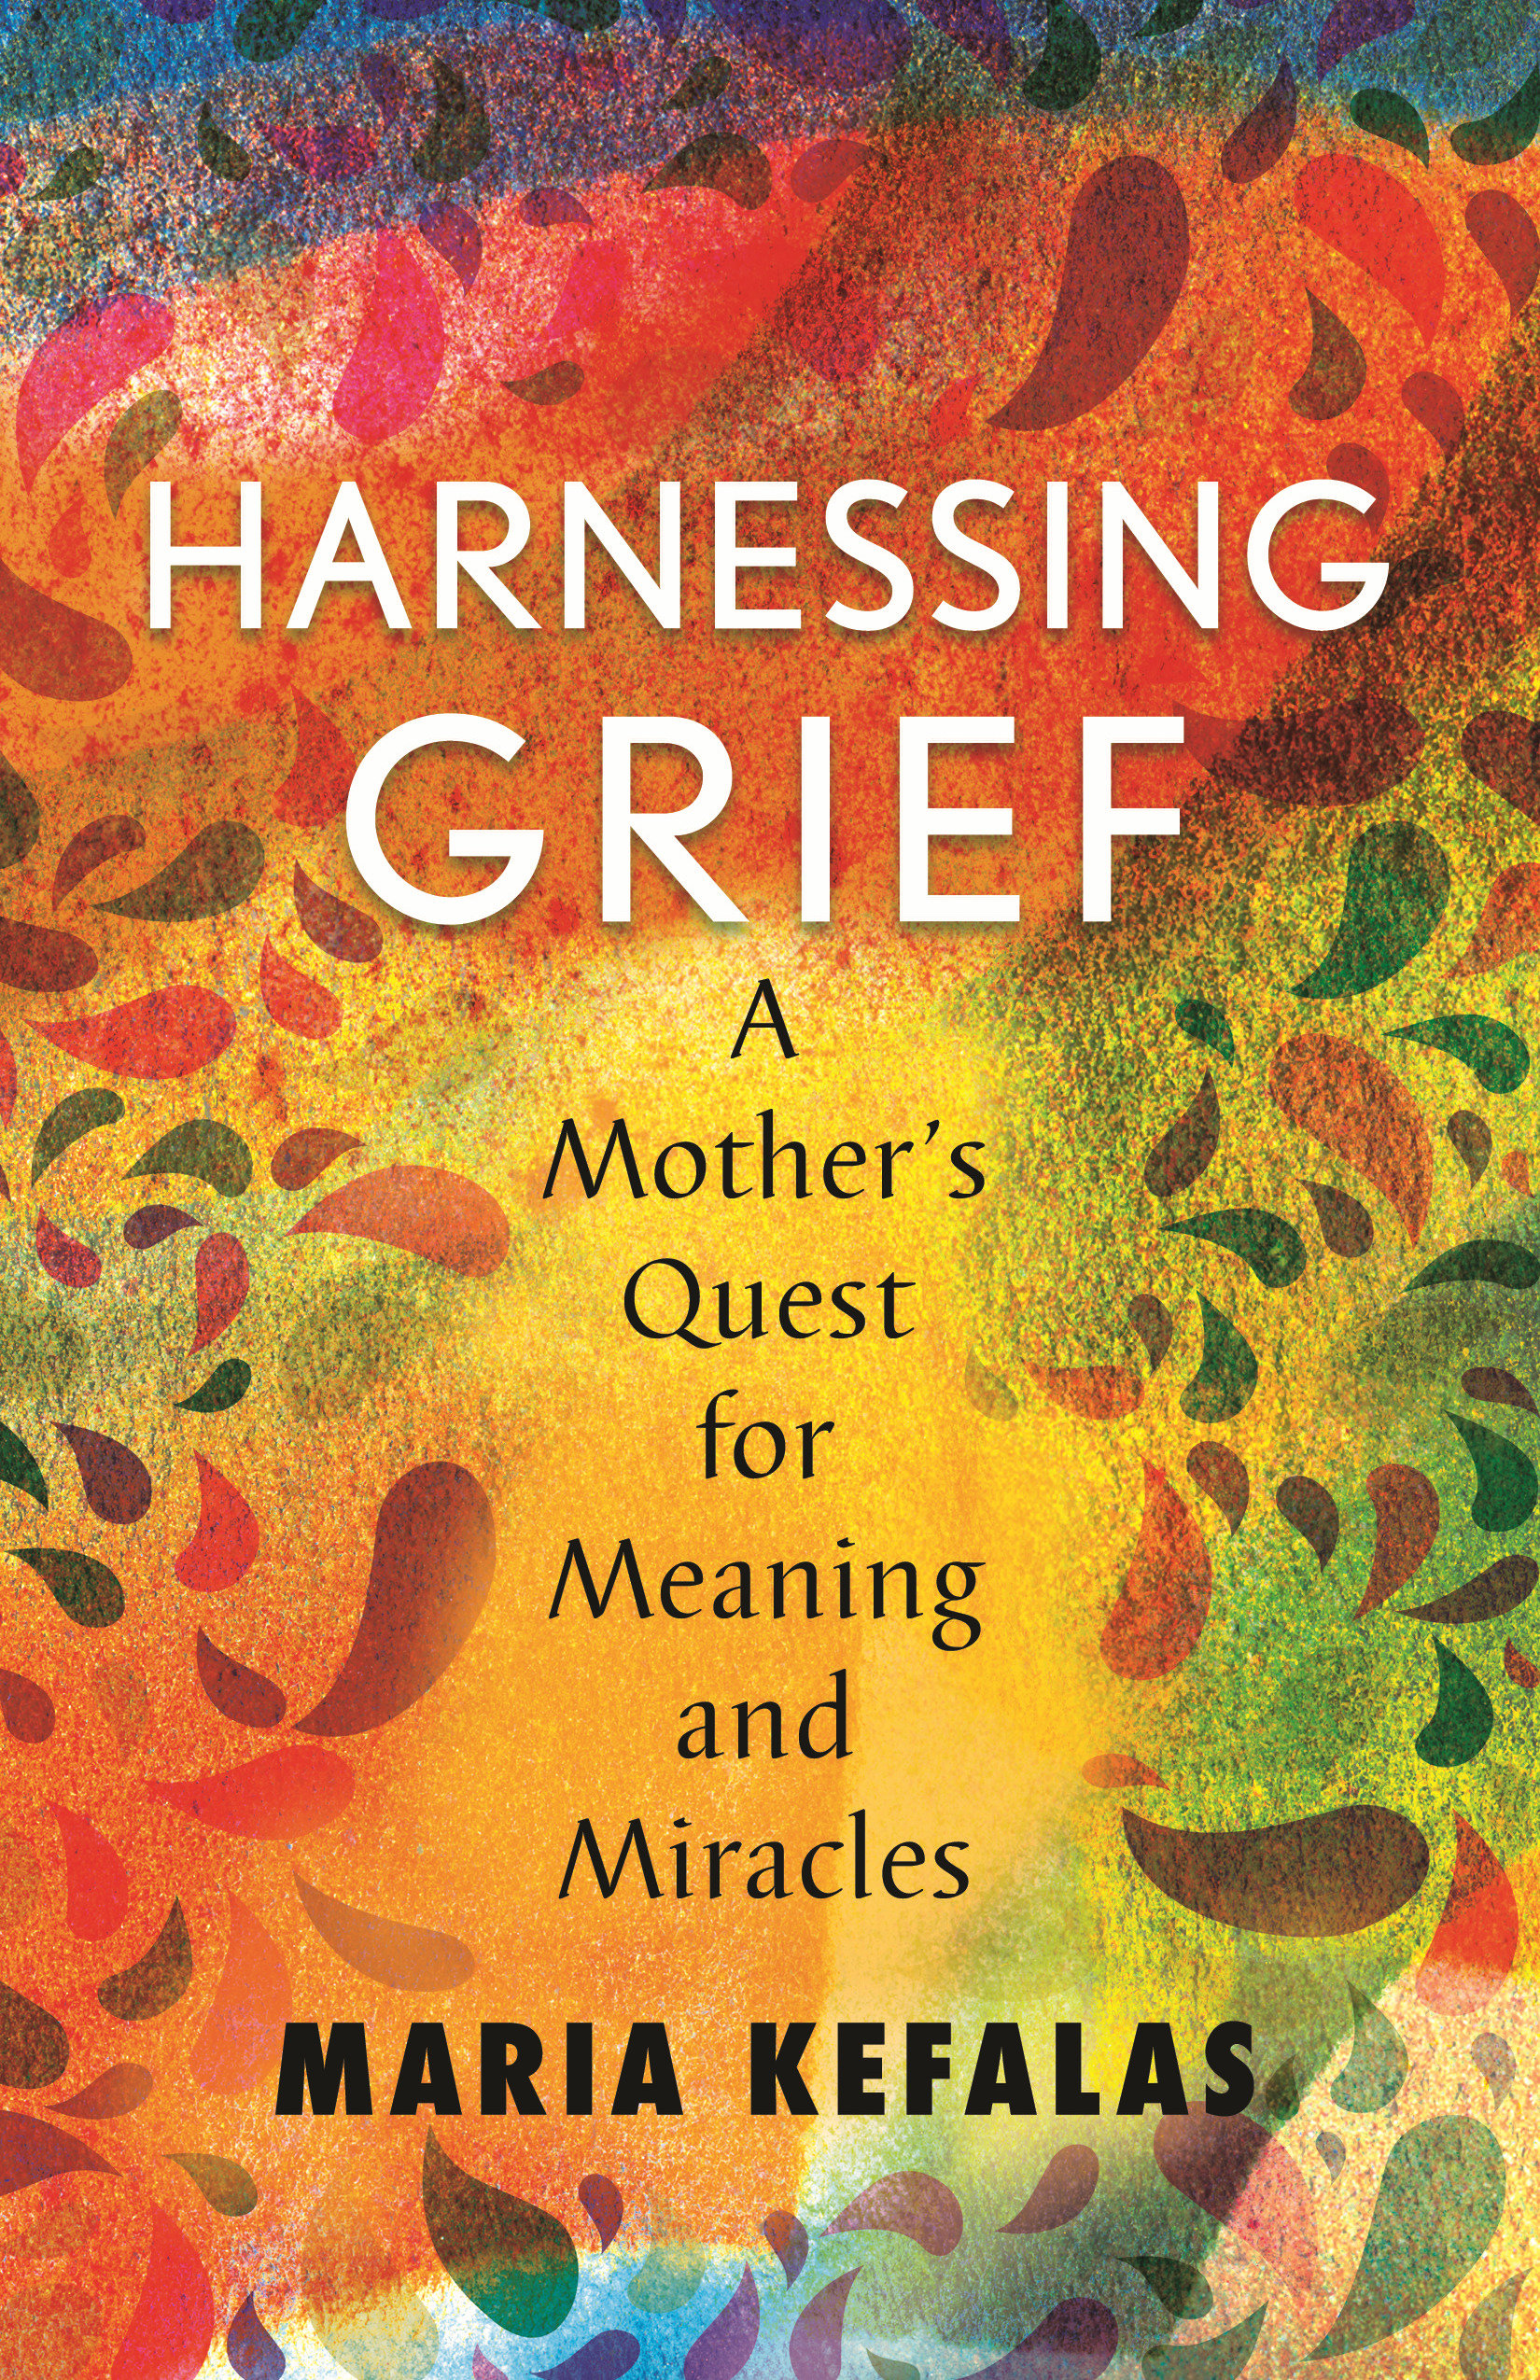 Harnessing Grief (Hardcover Book)